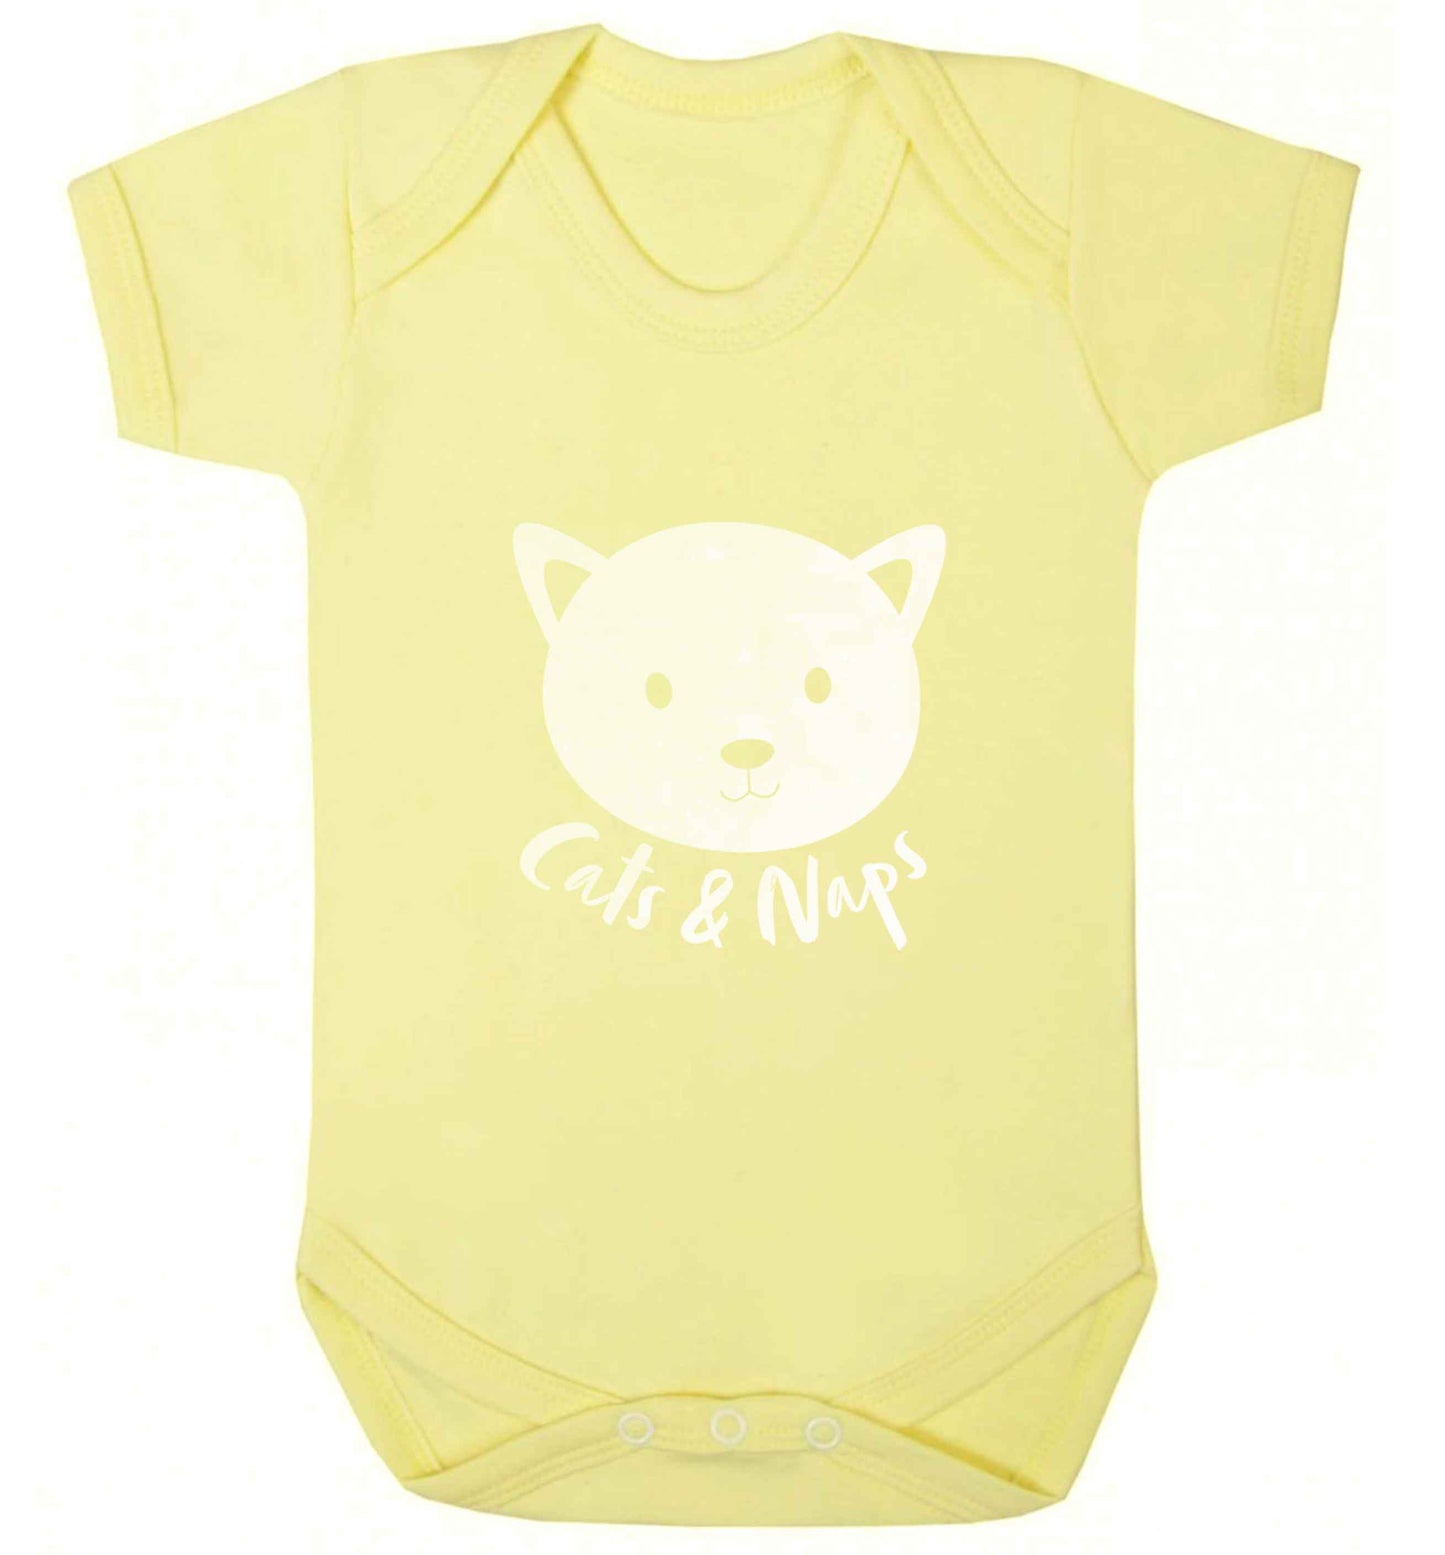 Cats and naps Kit baby vest pale yellow 18-24 months